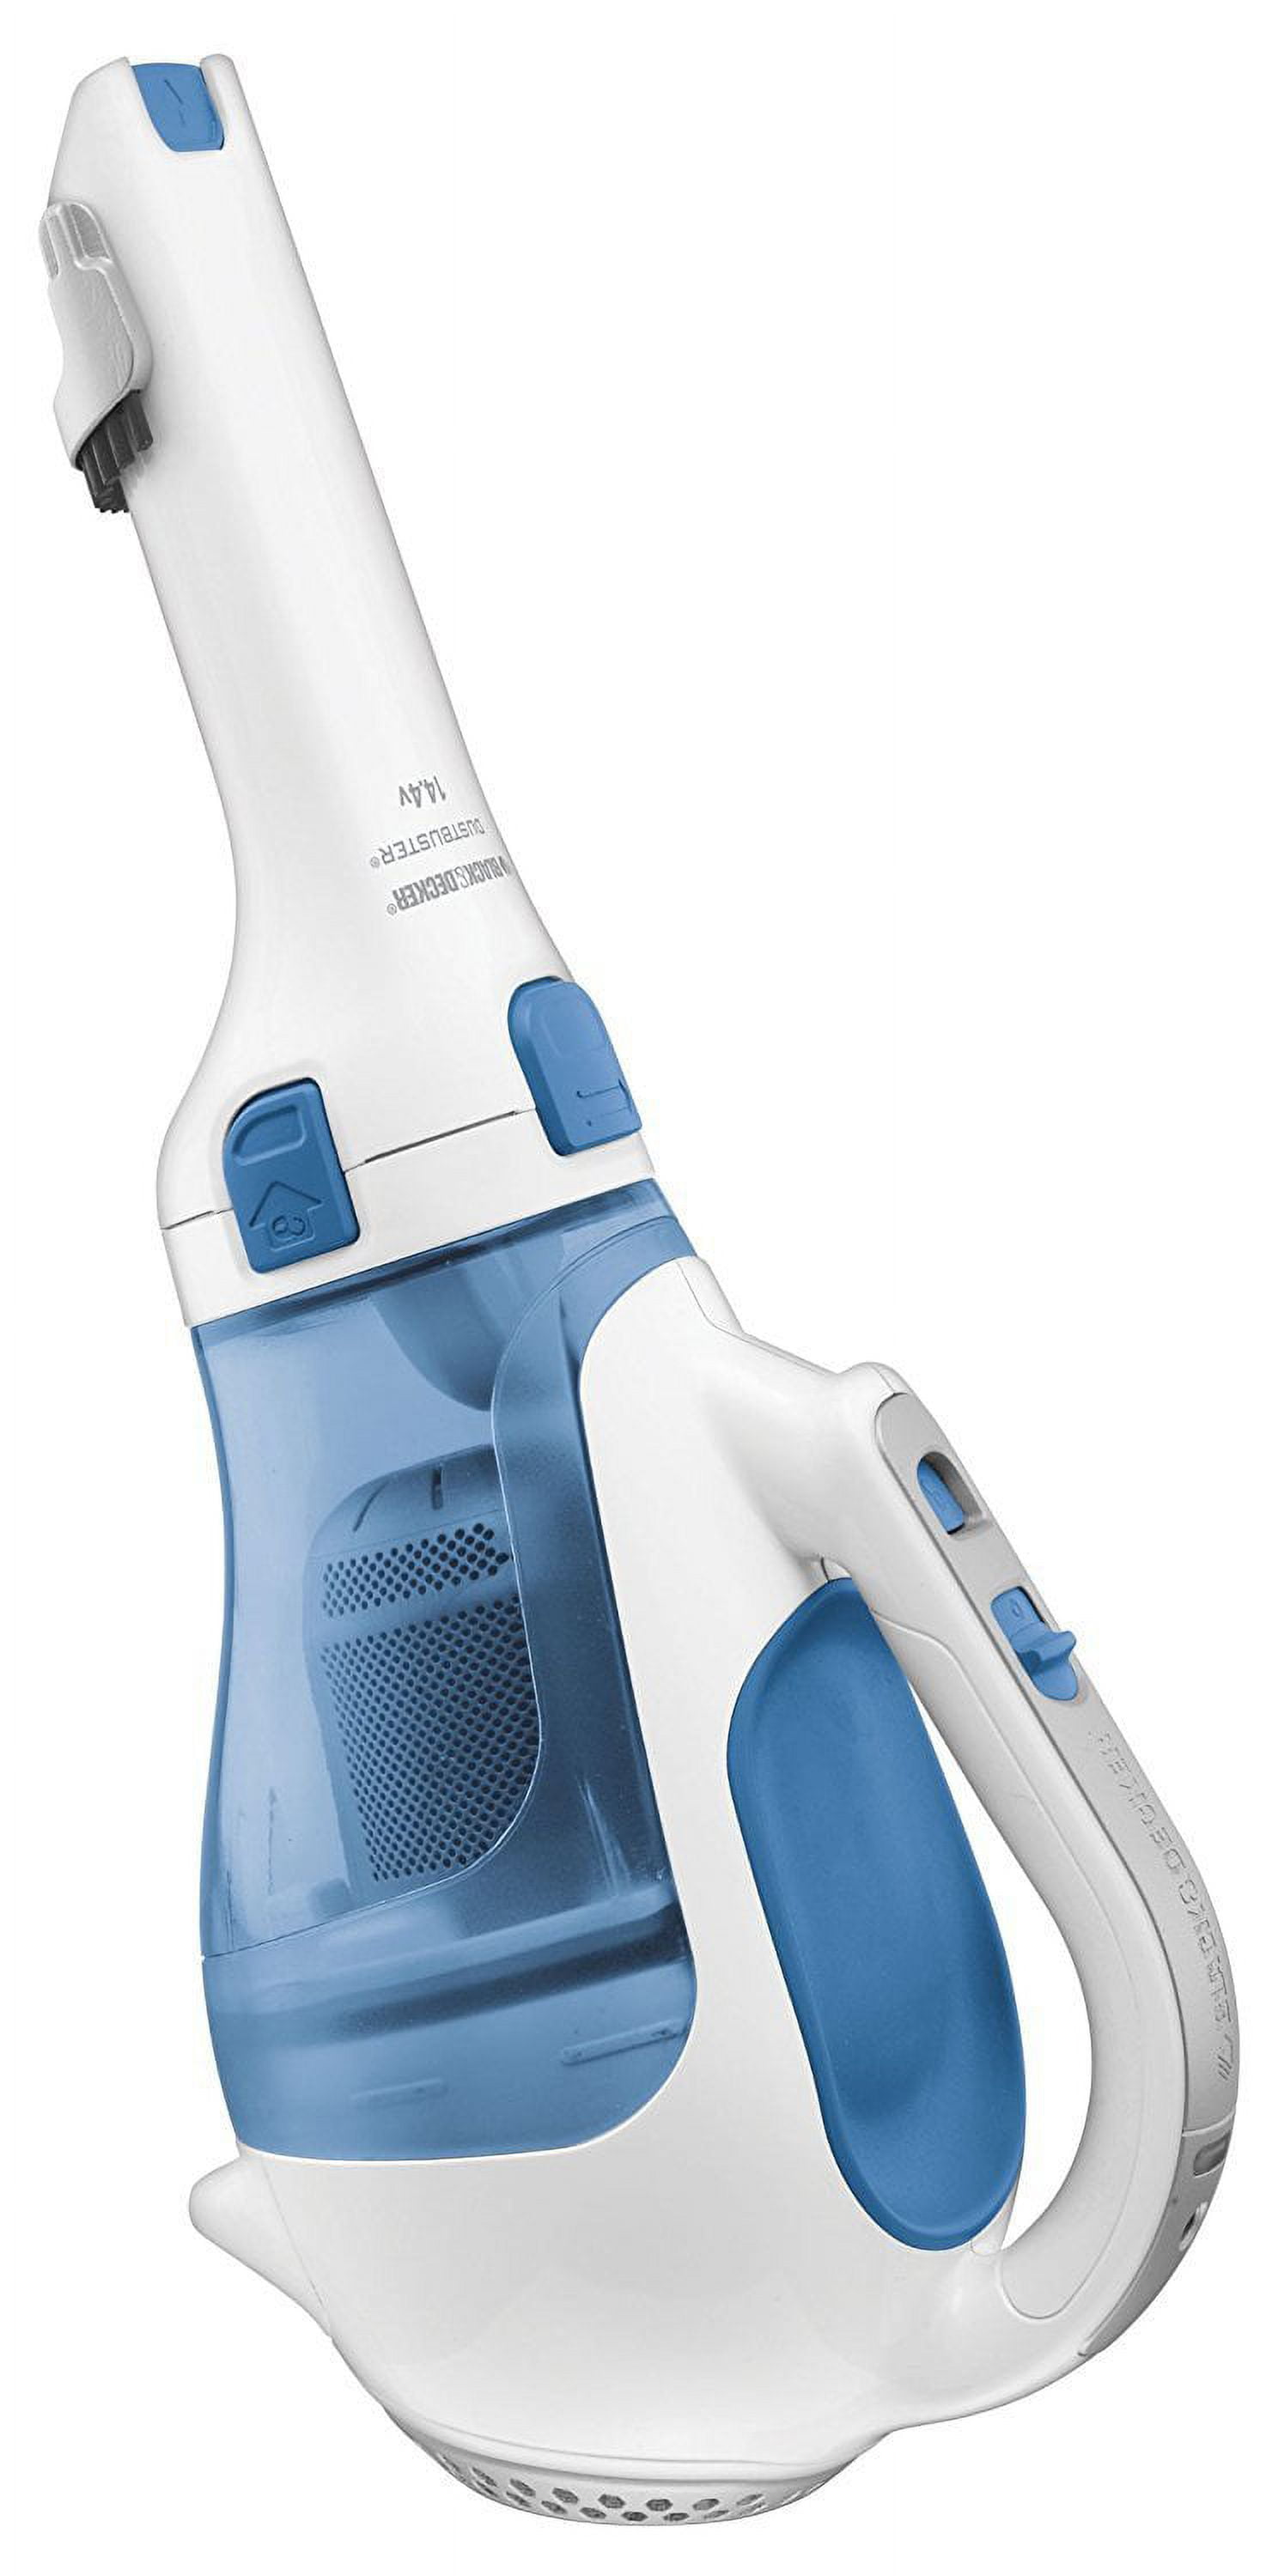  BLACK+DECKER dustbuster AdvancedClean Cordless Handheld Vacuum,  Compact Home and Car Vacuum with Crevice Tool (CHV1410L) - Household  Handheld Vacuums